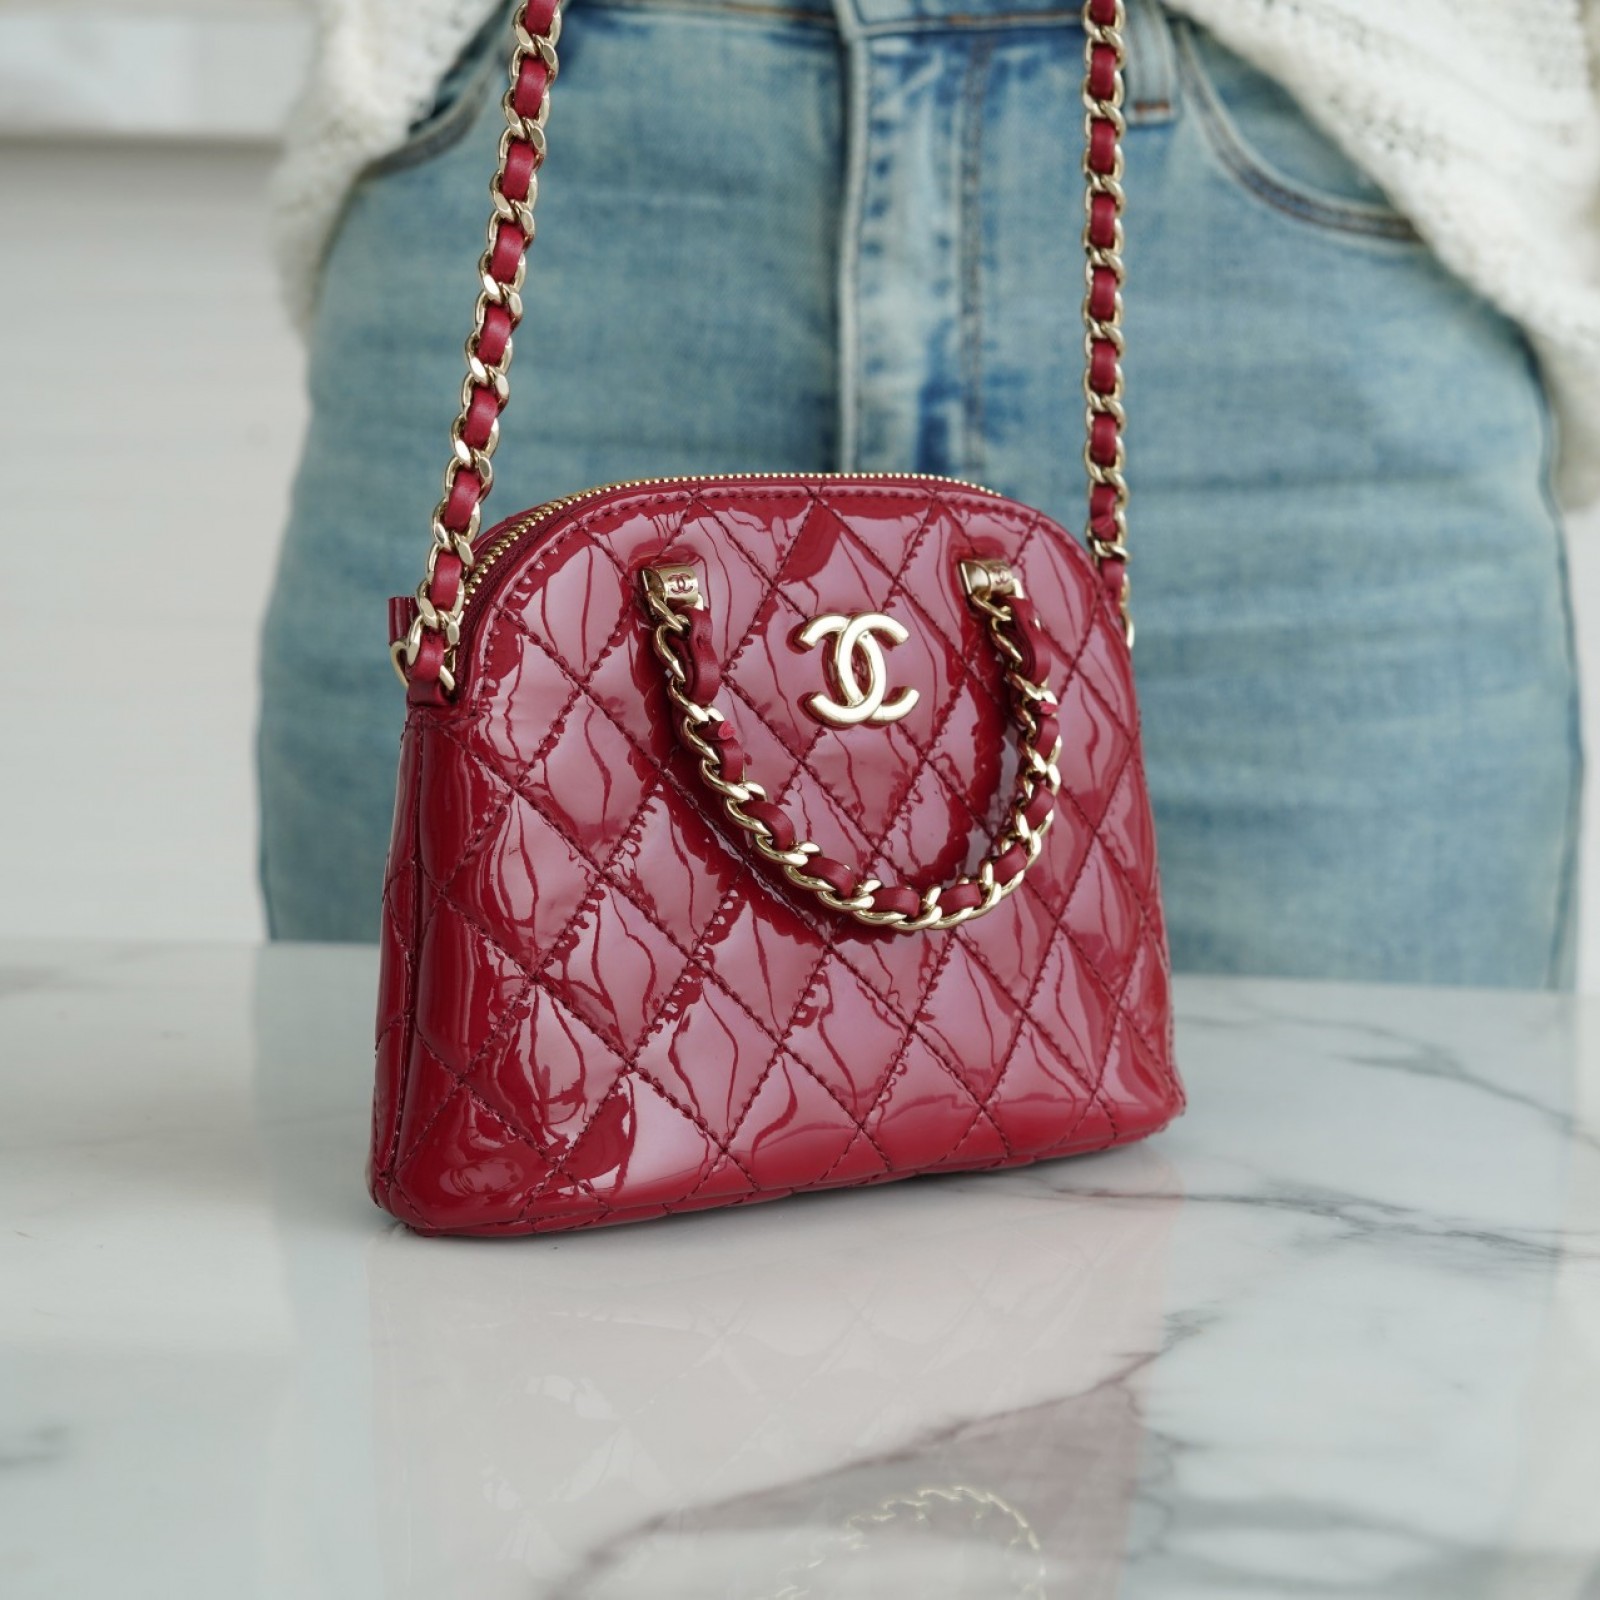 CHANEL SHINY COCO CLUTCH WITH CHAIN BAG